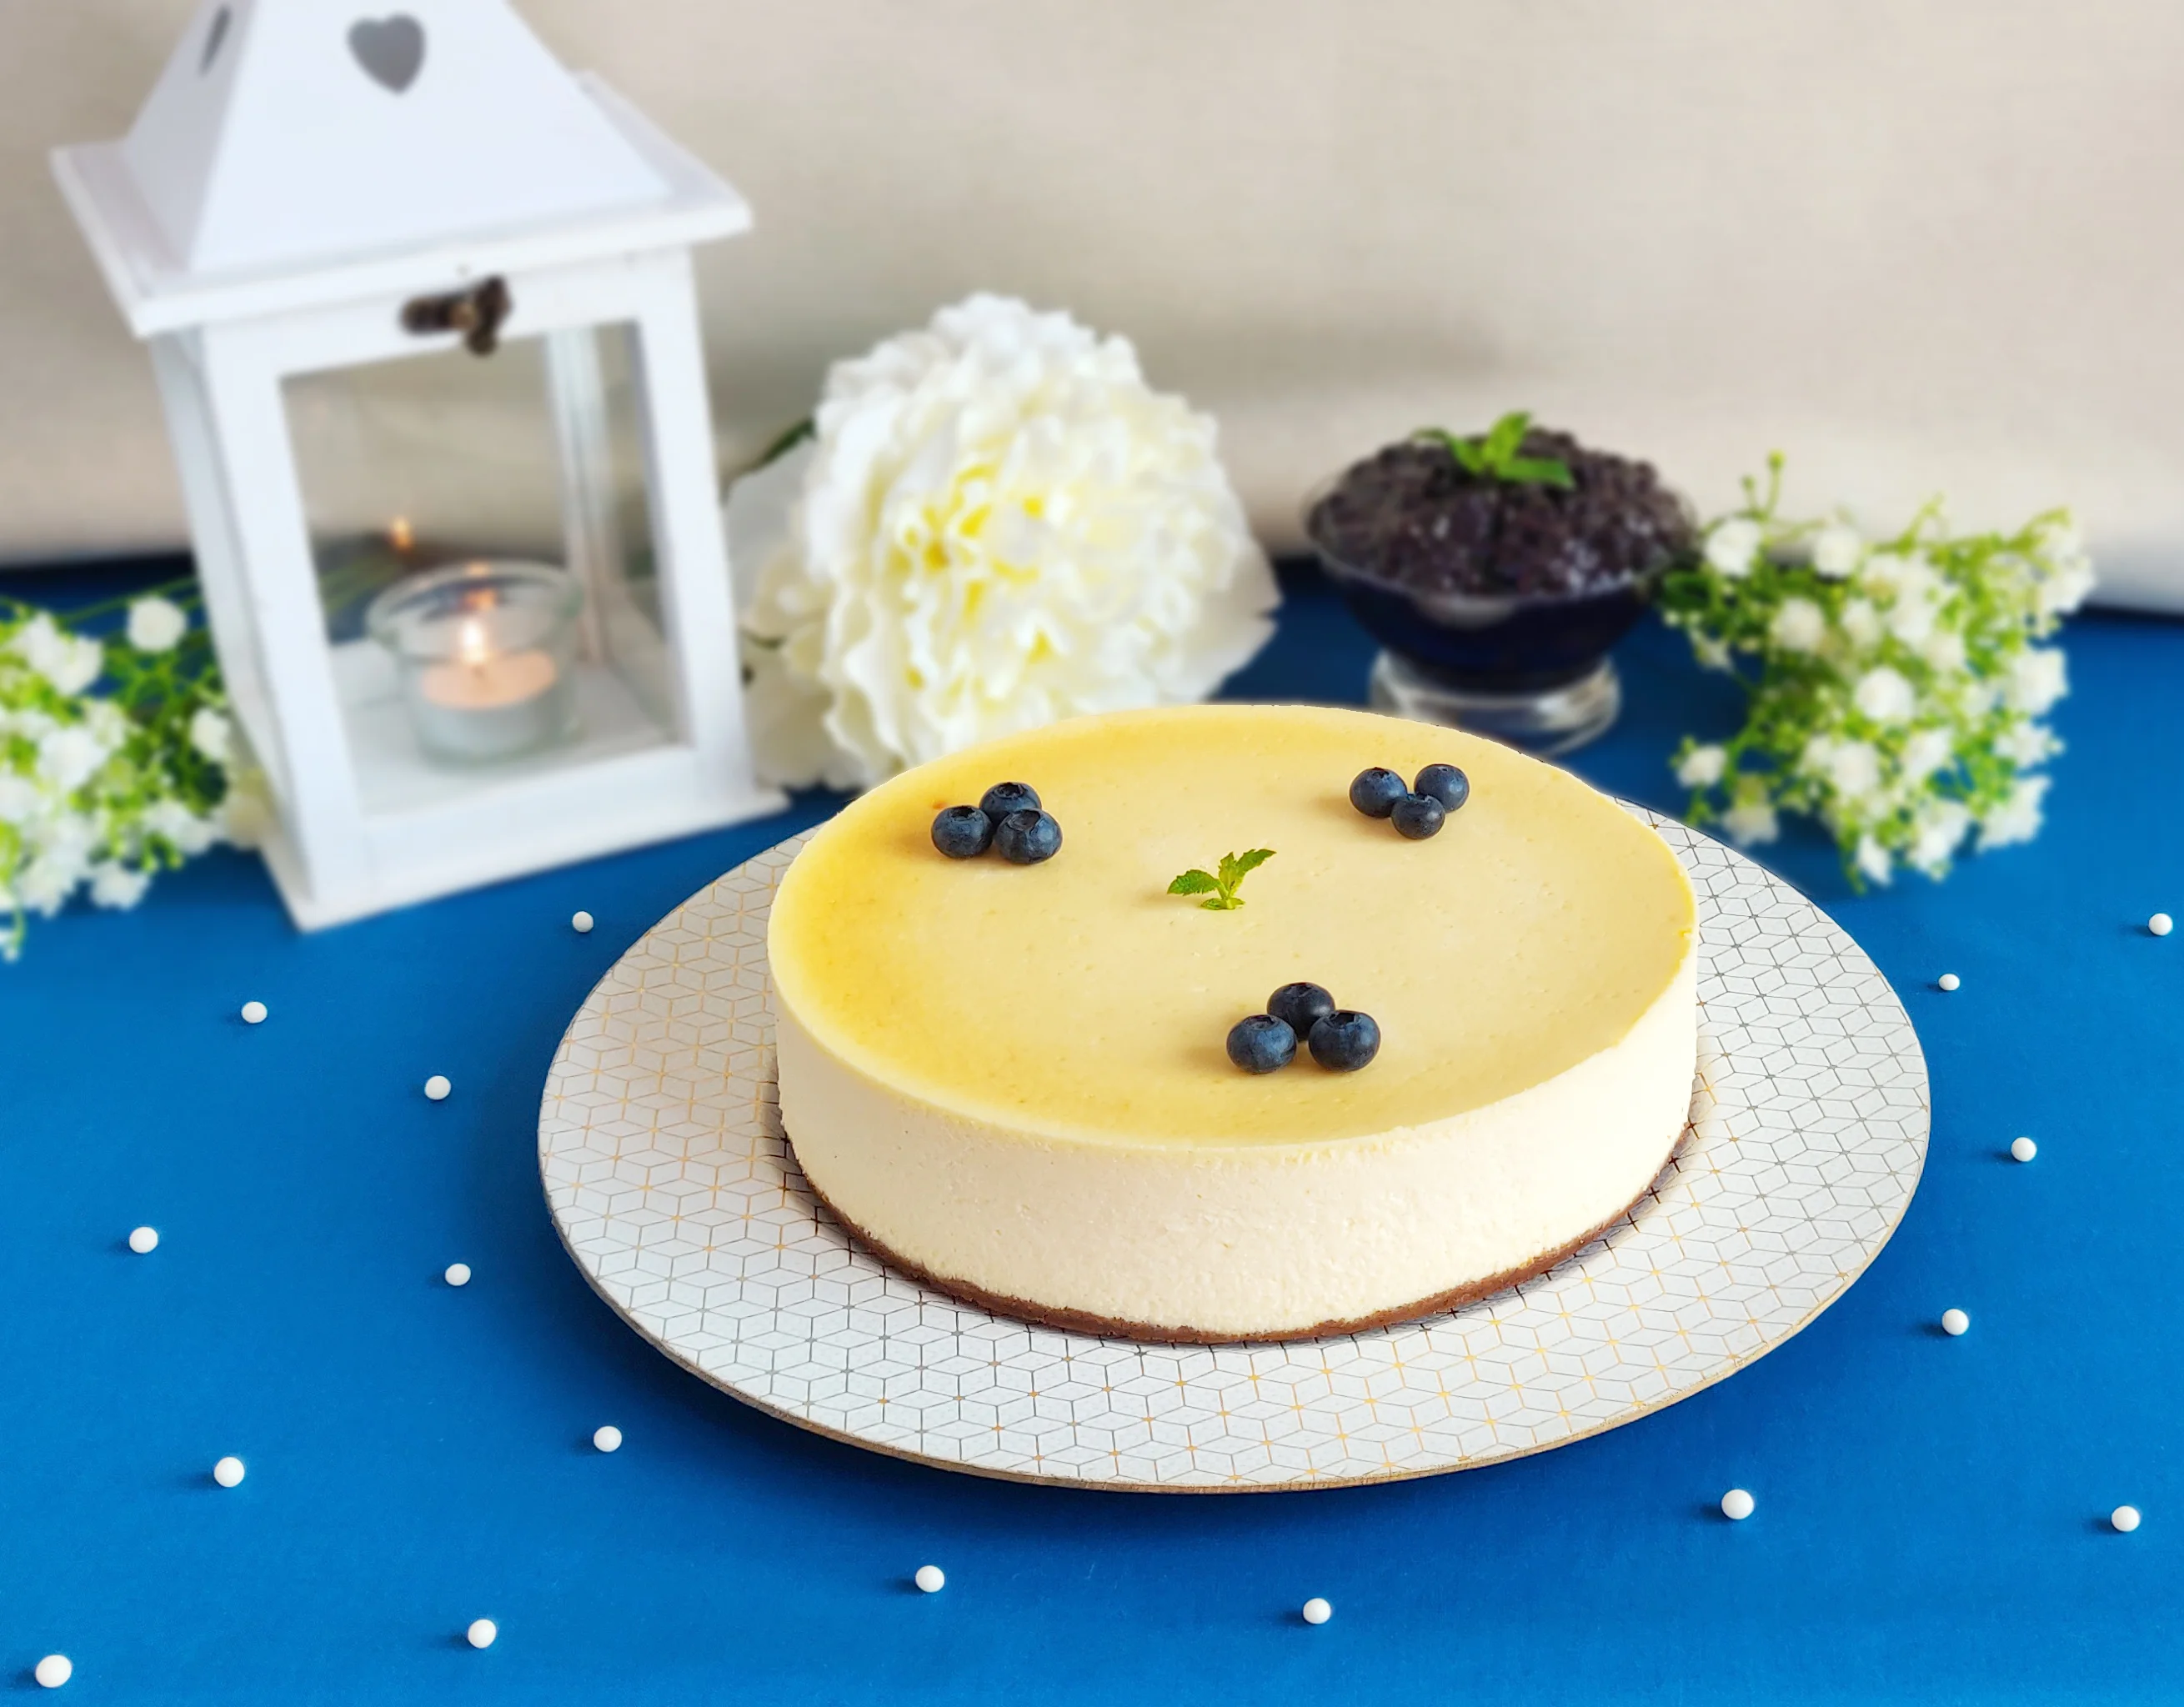 /assets/images/recipes/new-york-cheesecake/1.webp